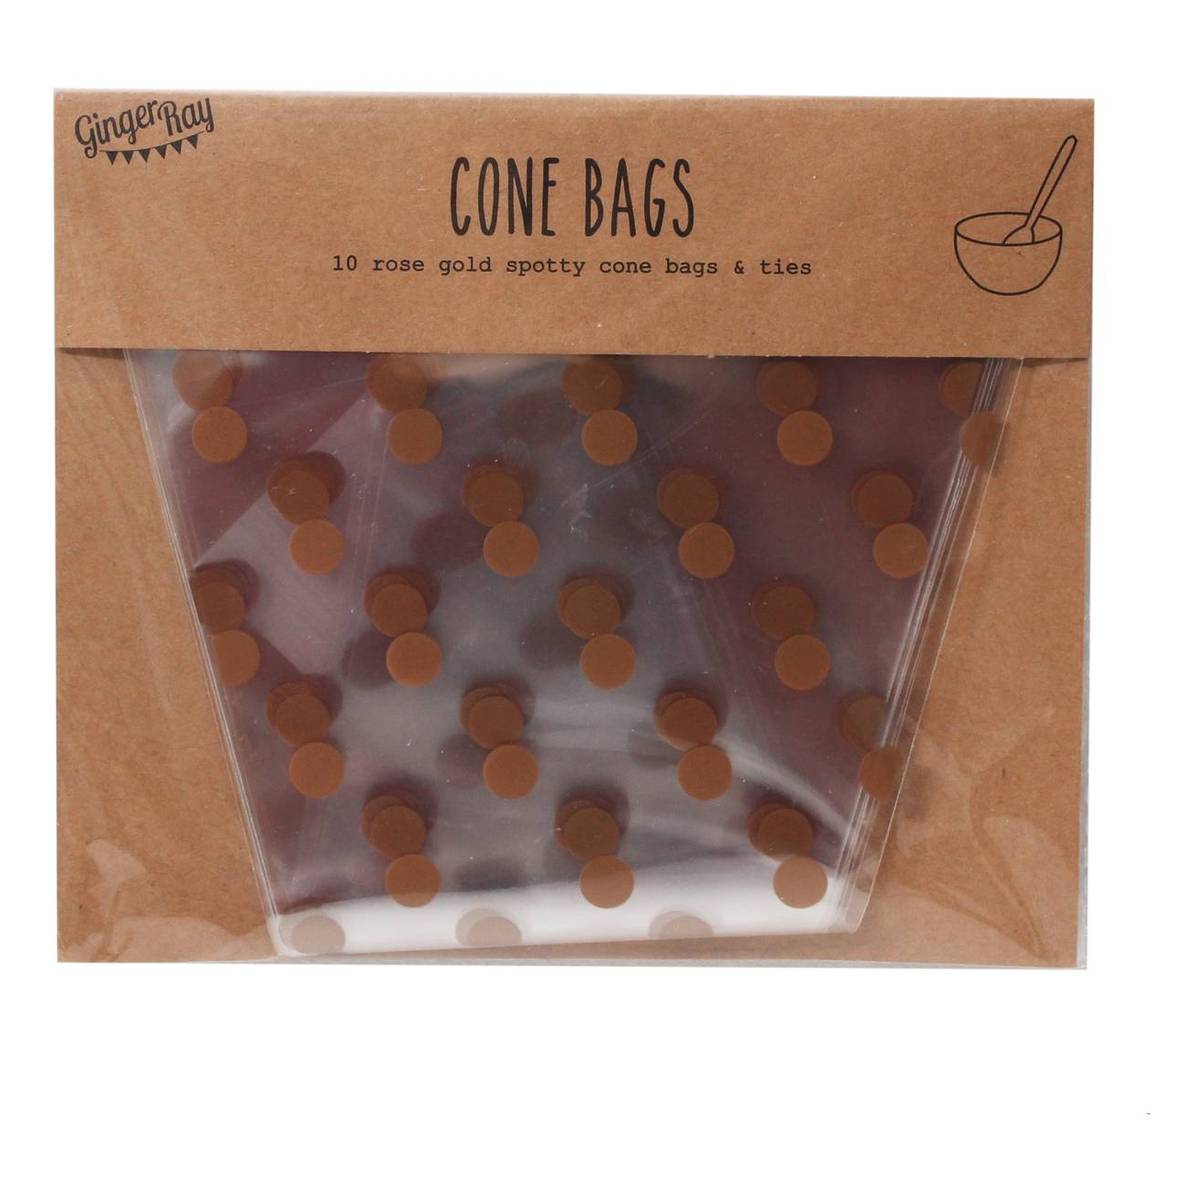 Ginger Ray Rose Gold Spot Cone Bags 10 Pack image number 2